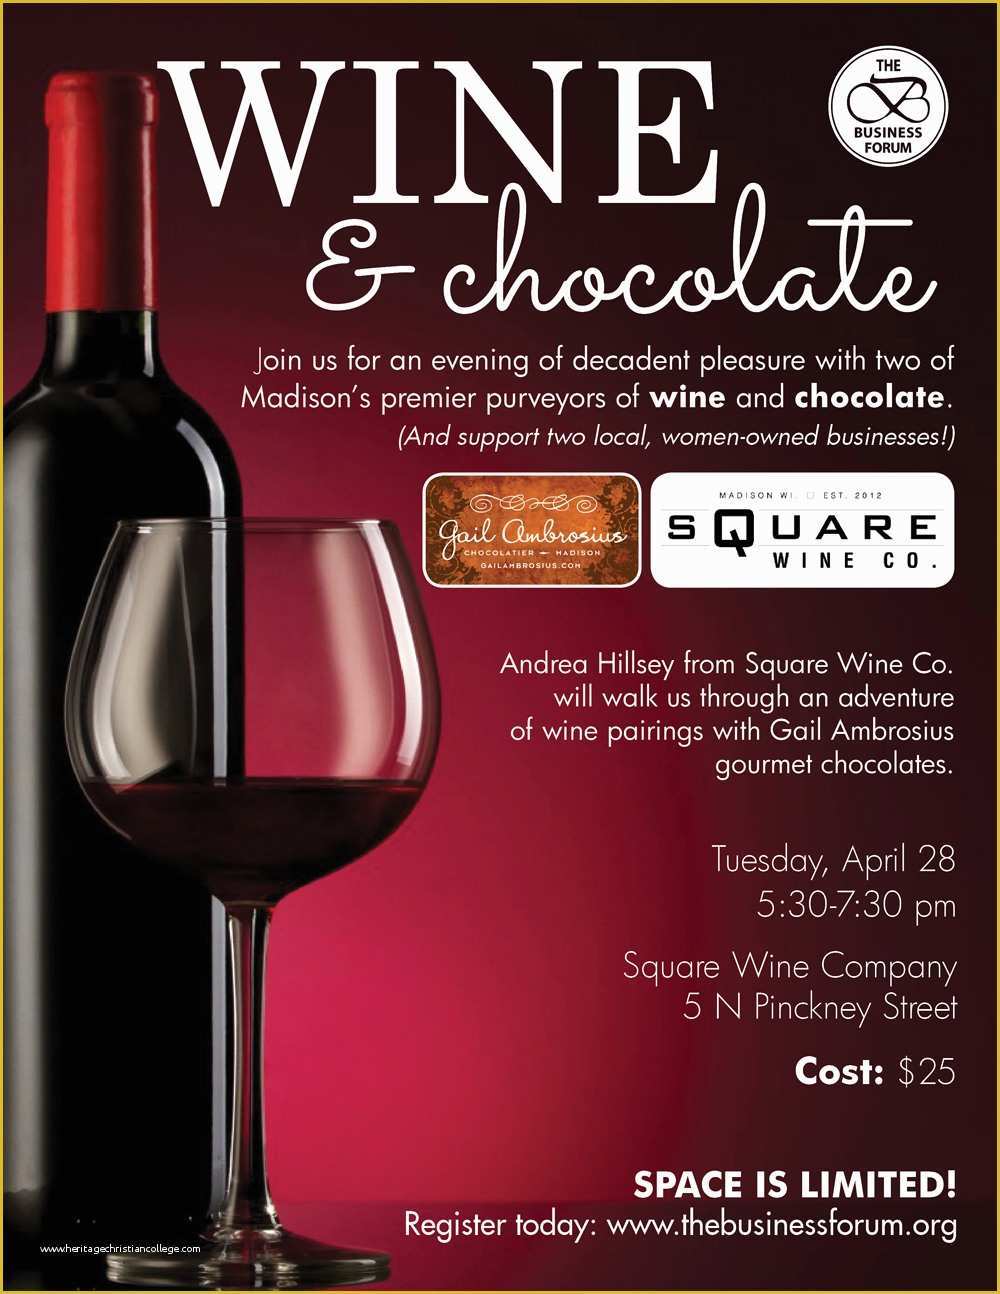 Free Wine Tasting Flyer Template Of the Business forum Wine and Chocolate Tasting